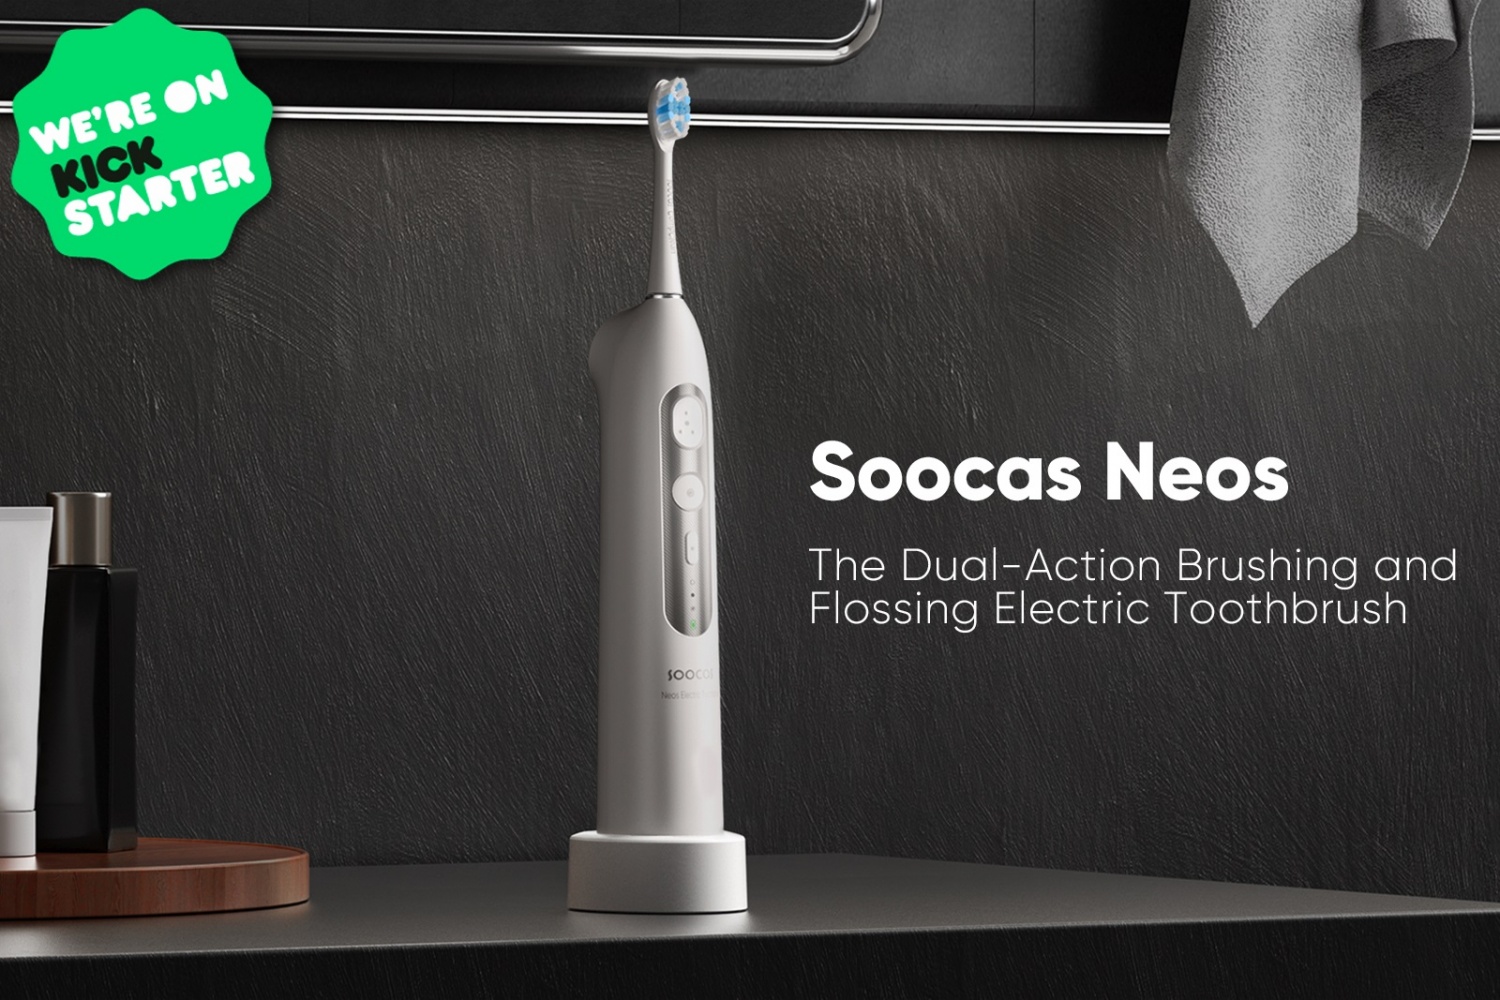 [SOOCAS] Soocas Neos: The Best Dual-Action Electric Toothbrush